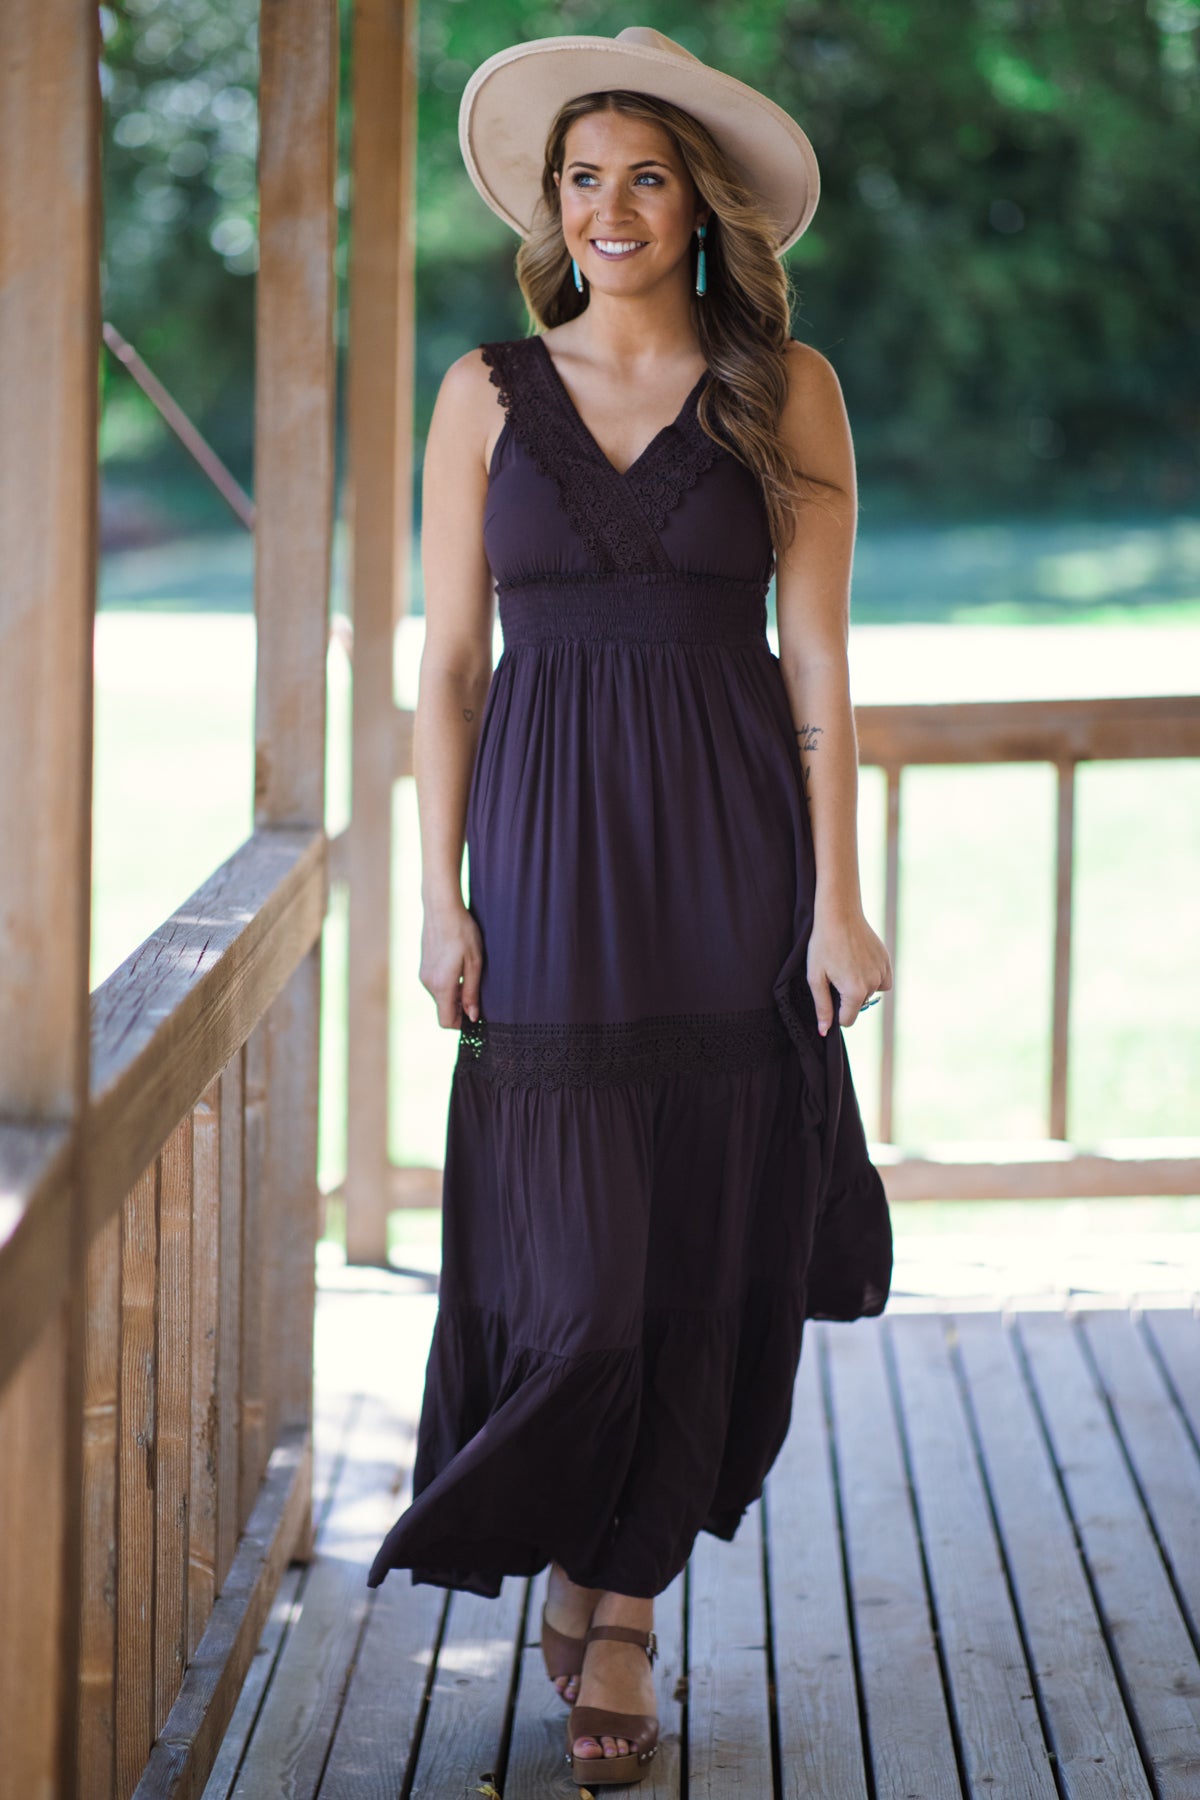 Brown Lace Trim Maxi Dress - Filly Flair